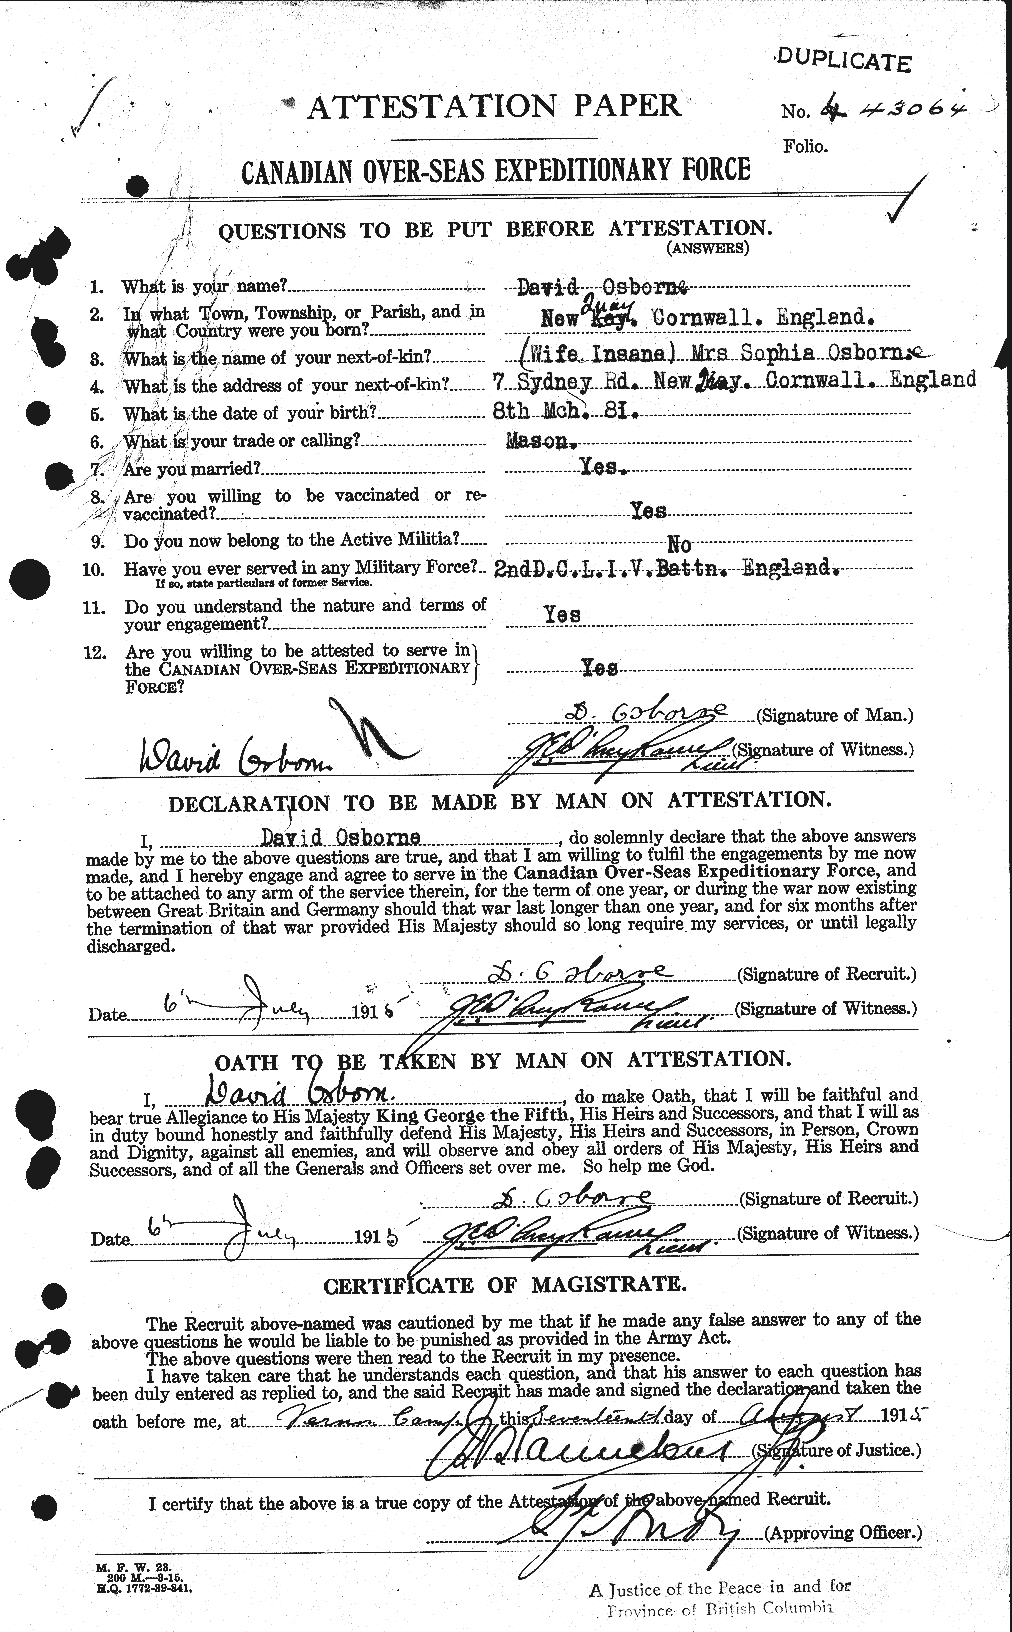 Personnel Records of the First World War - CEF 559185a